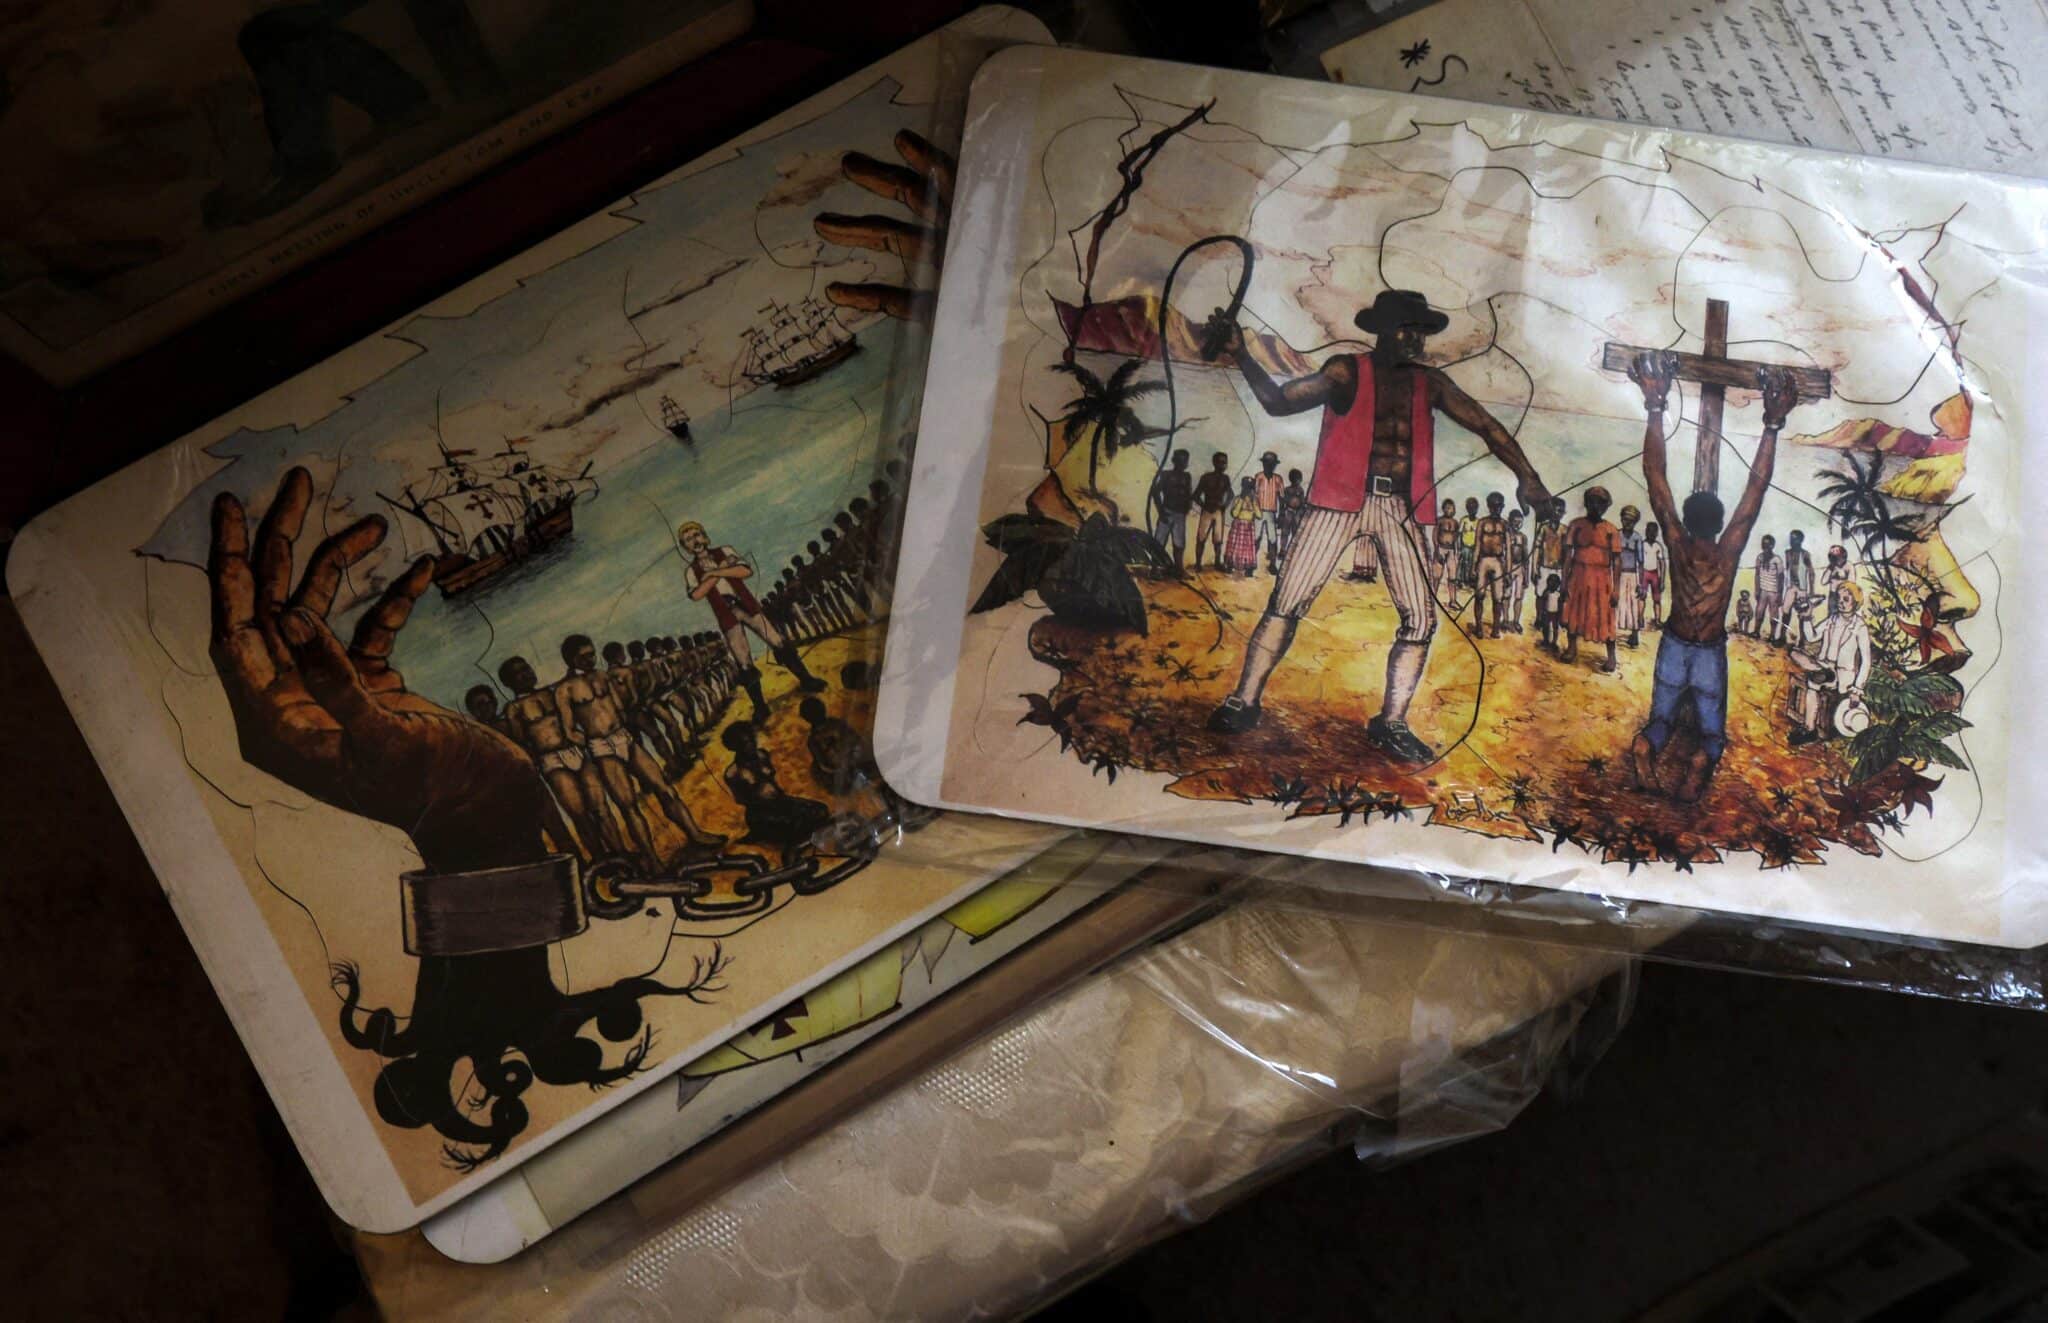 Puzzles depicting slaves in America are pictured in the Staten Island, N.Y., home of Elizabeth Meaders Feb. 2, 2022. Meaders, 90, auctioned a collection of thousands of historical and cultural artifacts tracing the African American experience from the beginnings of slavery through the civil rights movement of the '60s and today's Black Lives Matter movement. (CNS photo/Mike Segar, Reuters)